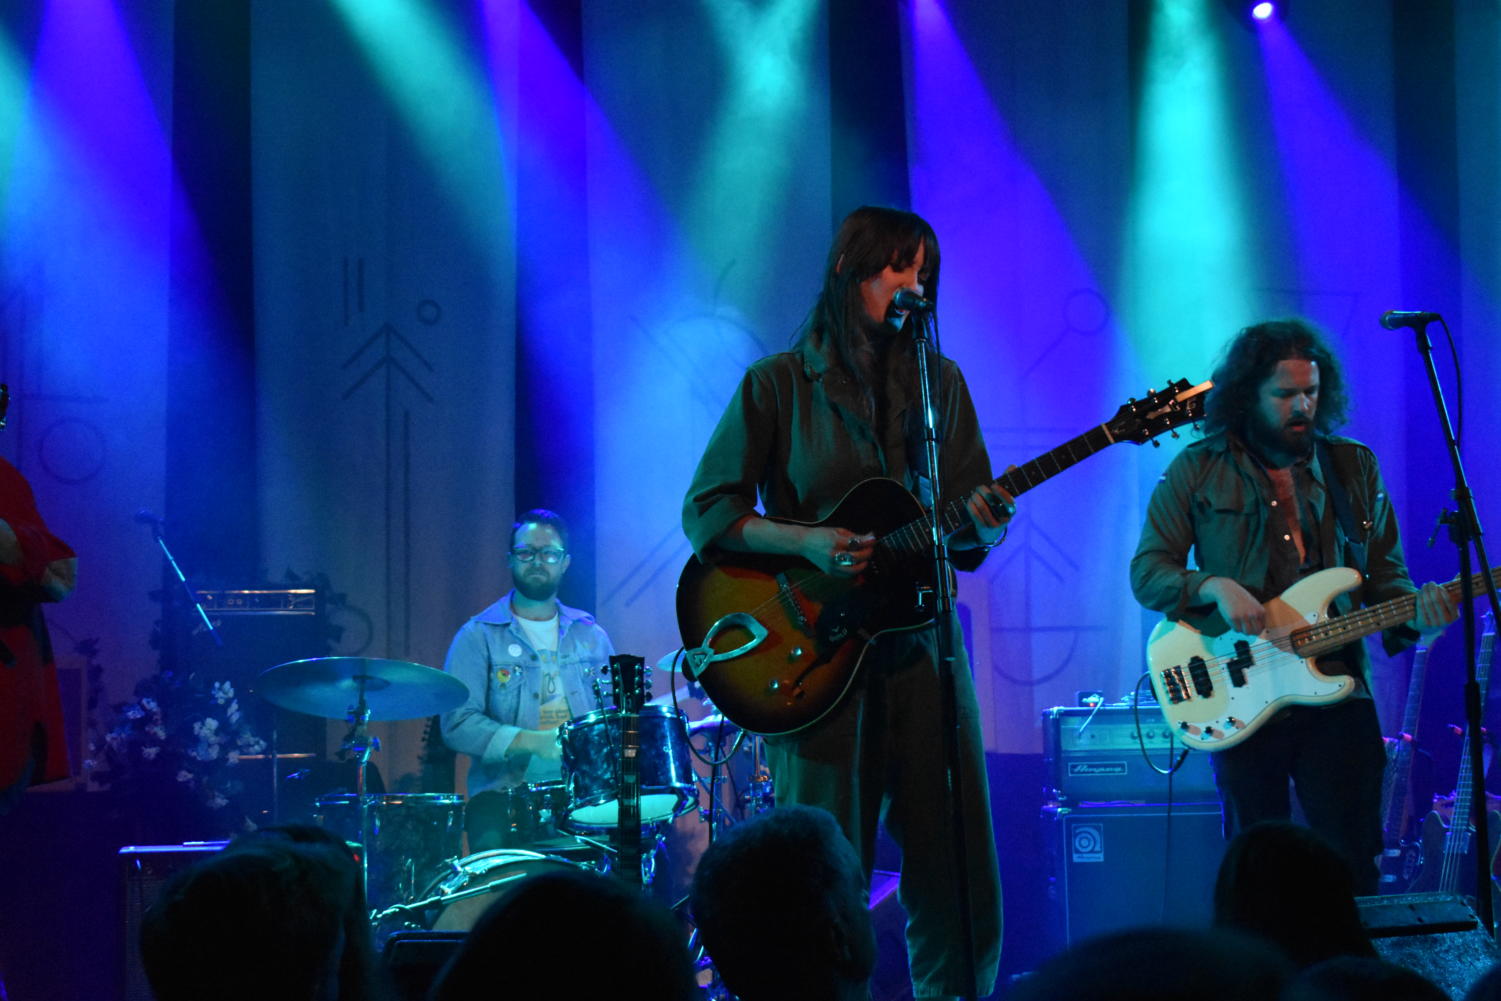 Los Angeles-based band Valley Queen opened for Laura Marling on Sunday night.